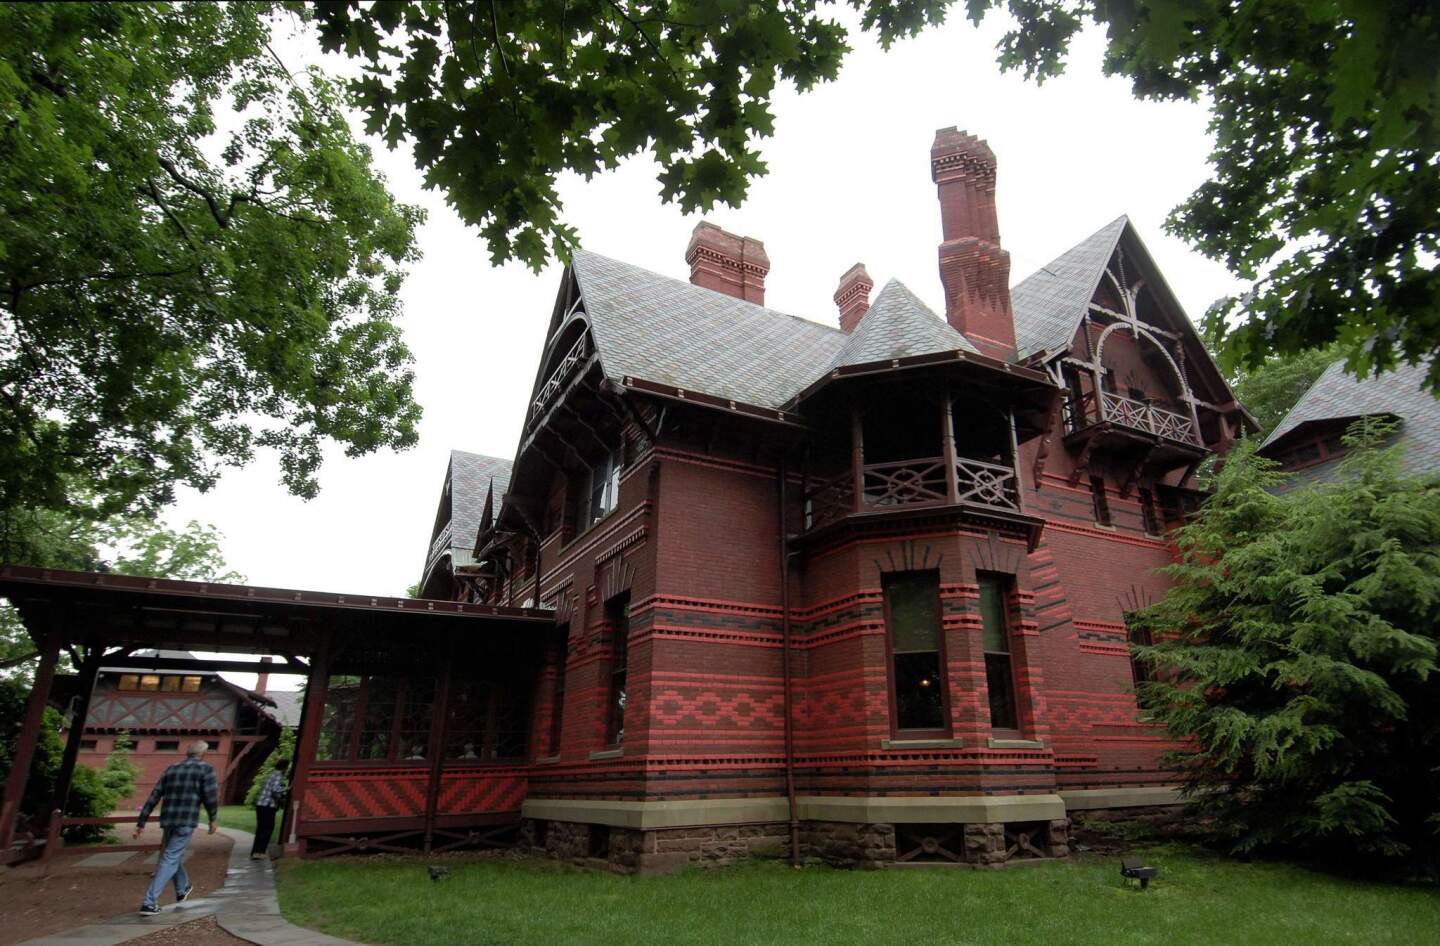 Visitors enter the Mark Twain House in Hartford, Conn., on June 4, 2008. It was built in 1874.